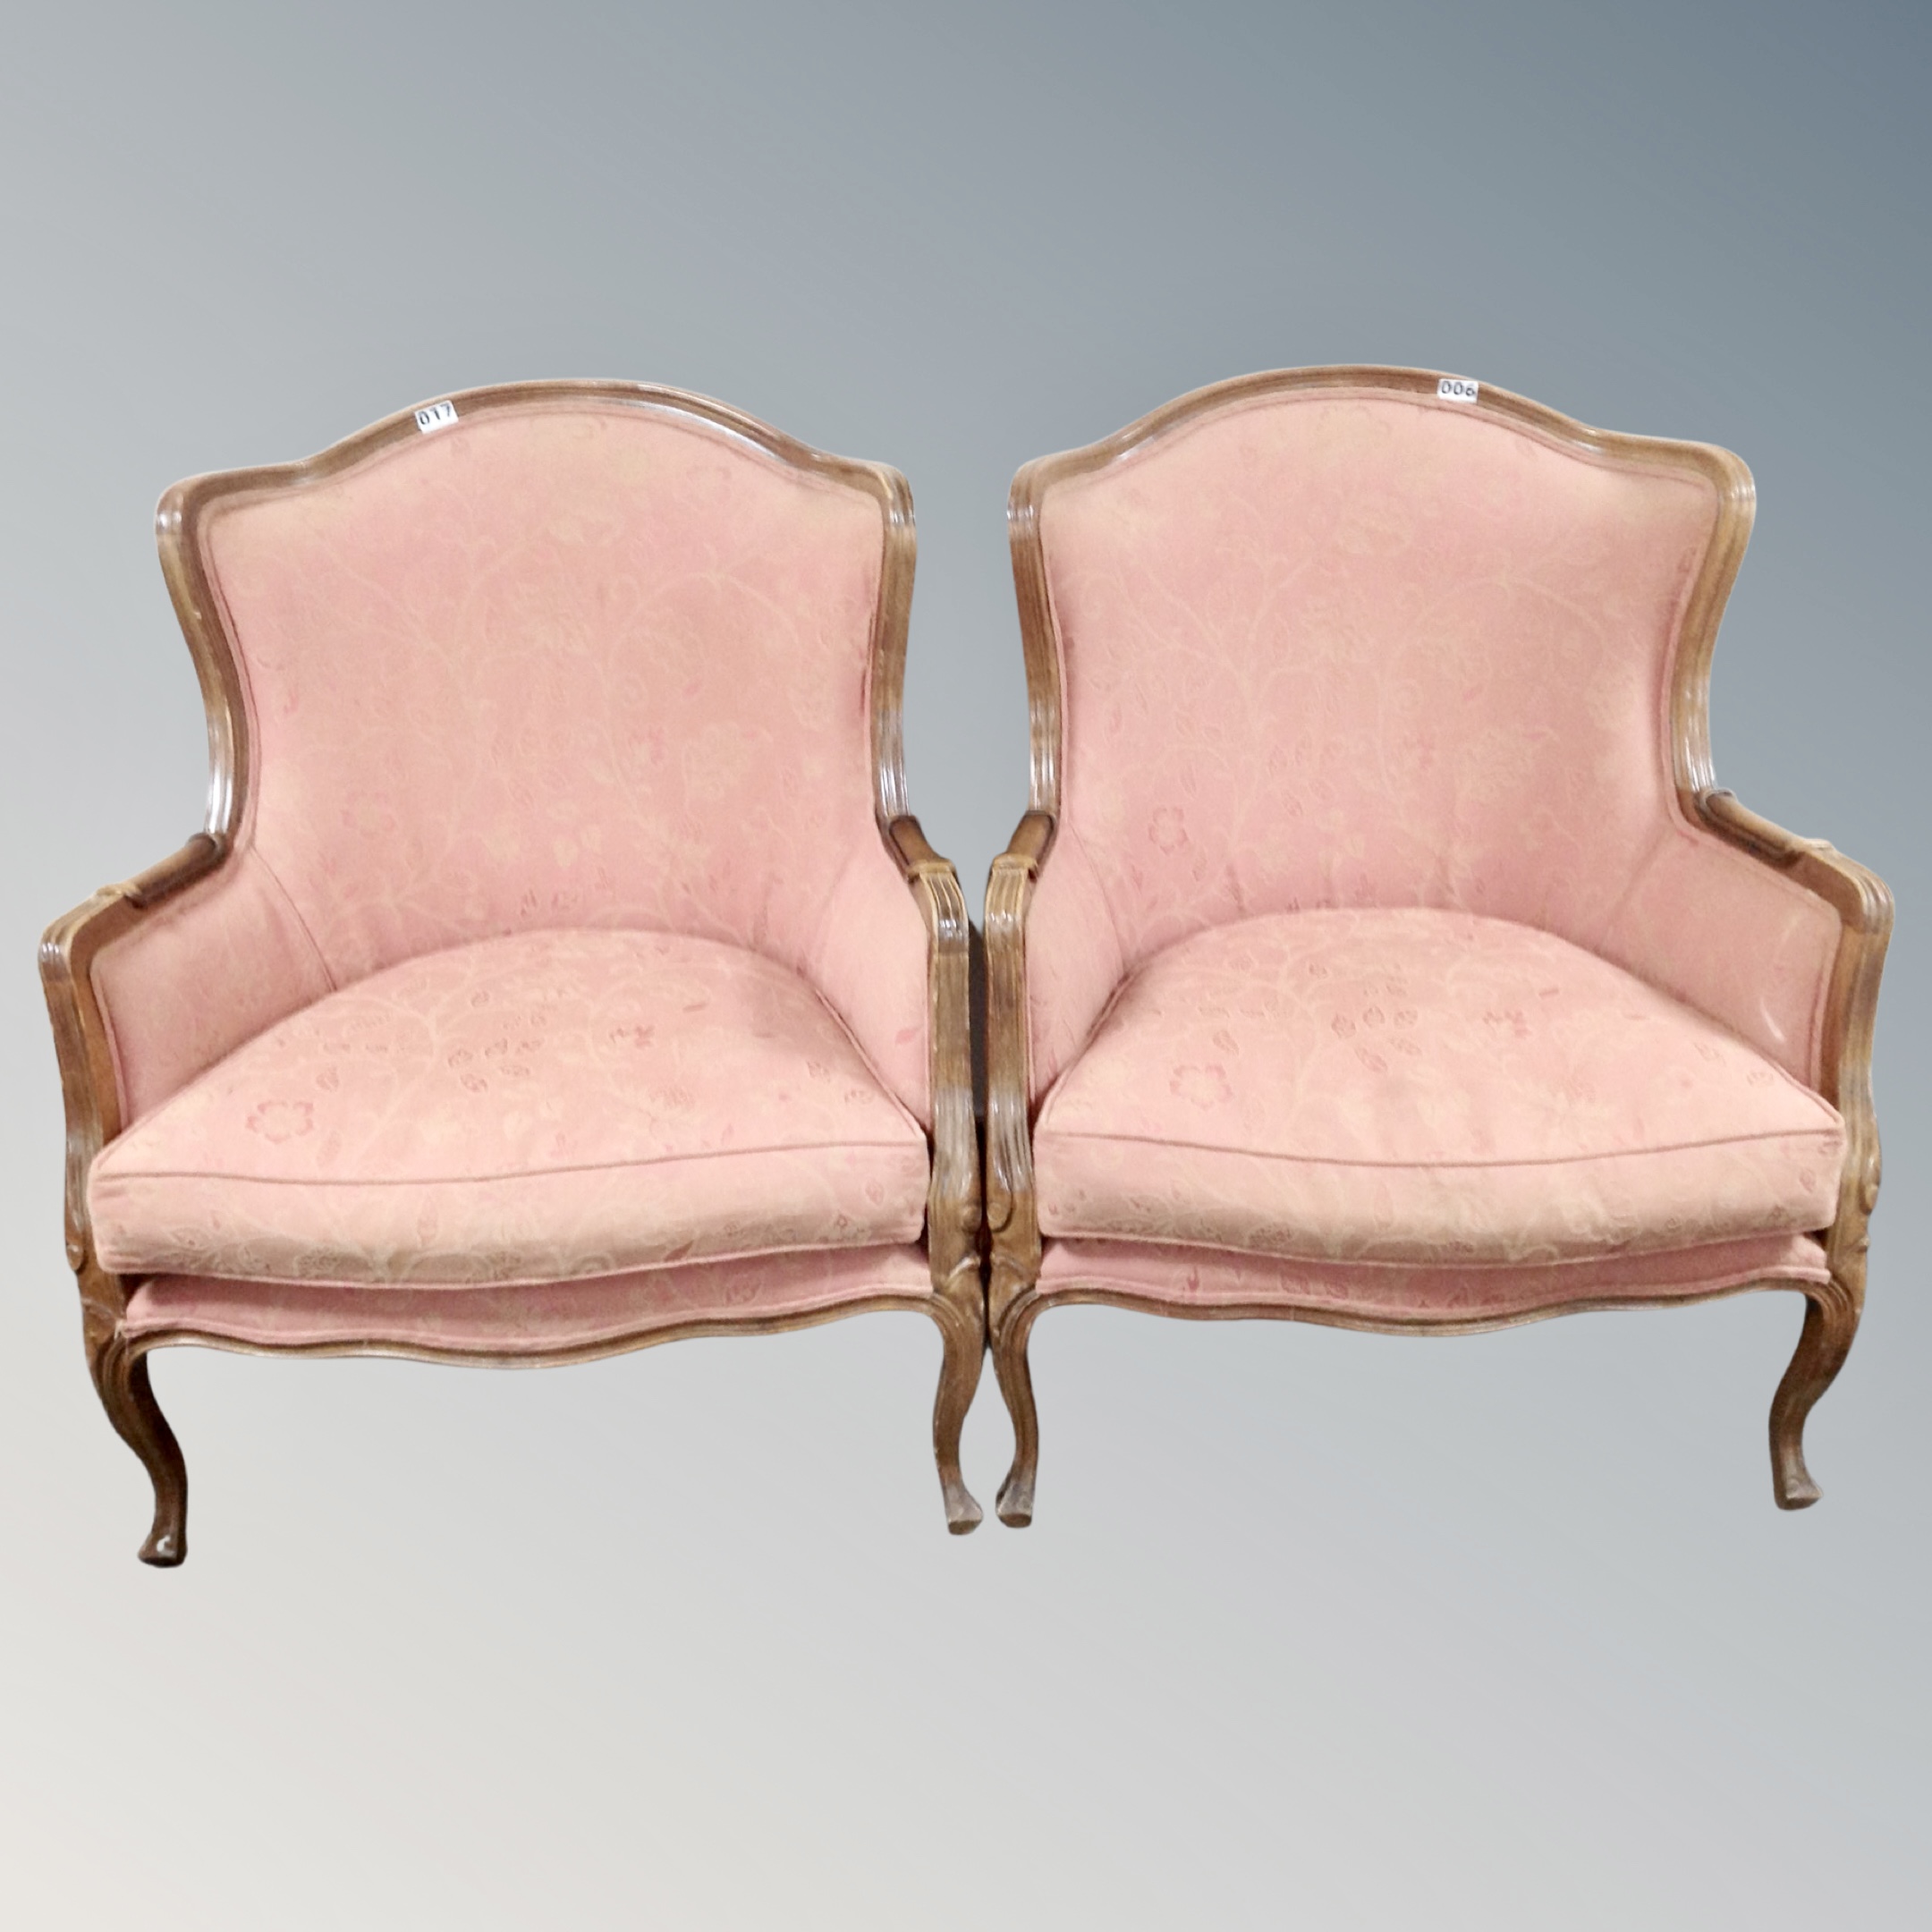 A pair of French style beech framed armchairs upholstered in salmon fabric